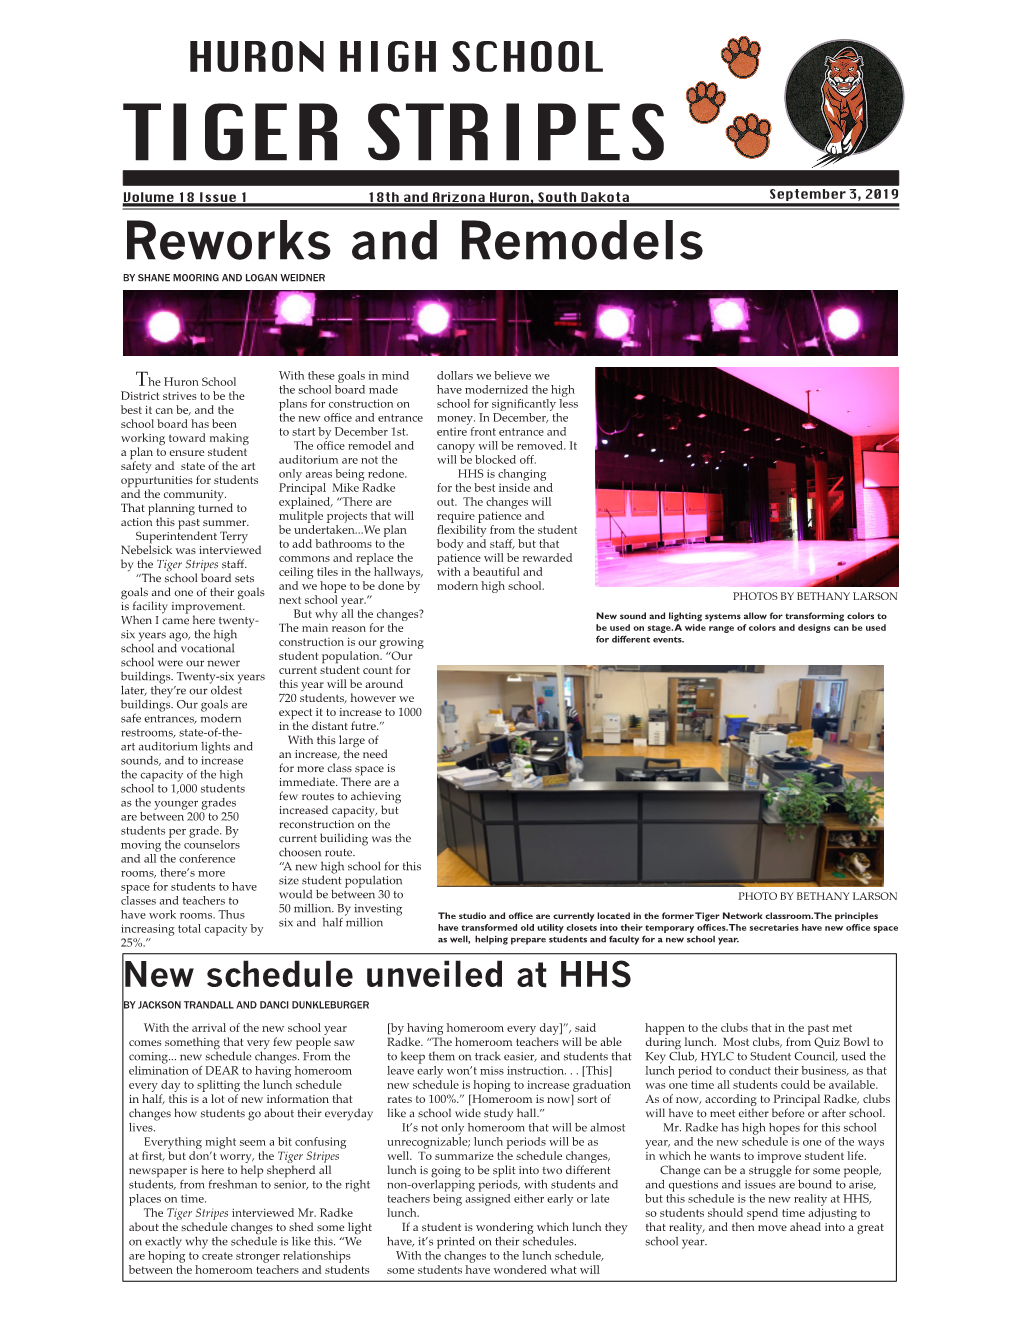 TIGER STRIPES Volume 18 Issue 1 18Th and Arizona Huron, South Dakota September 3, 2019 Reworks and Remodels by SHANE MOORING and LOGAN WEIDNER